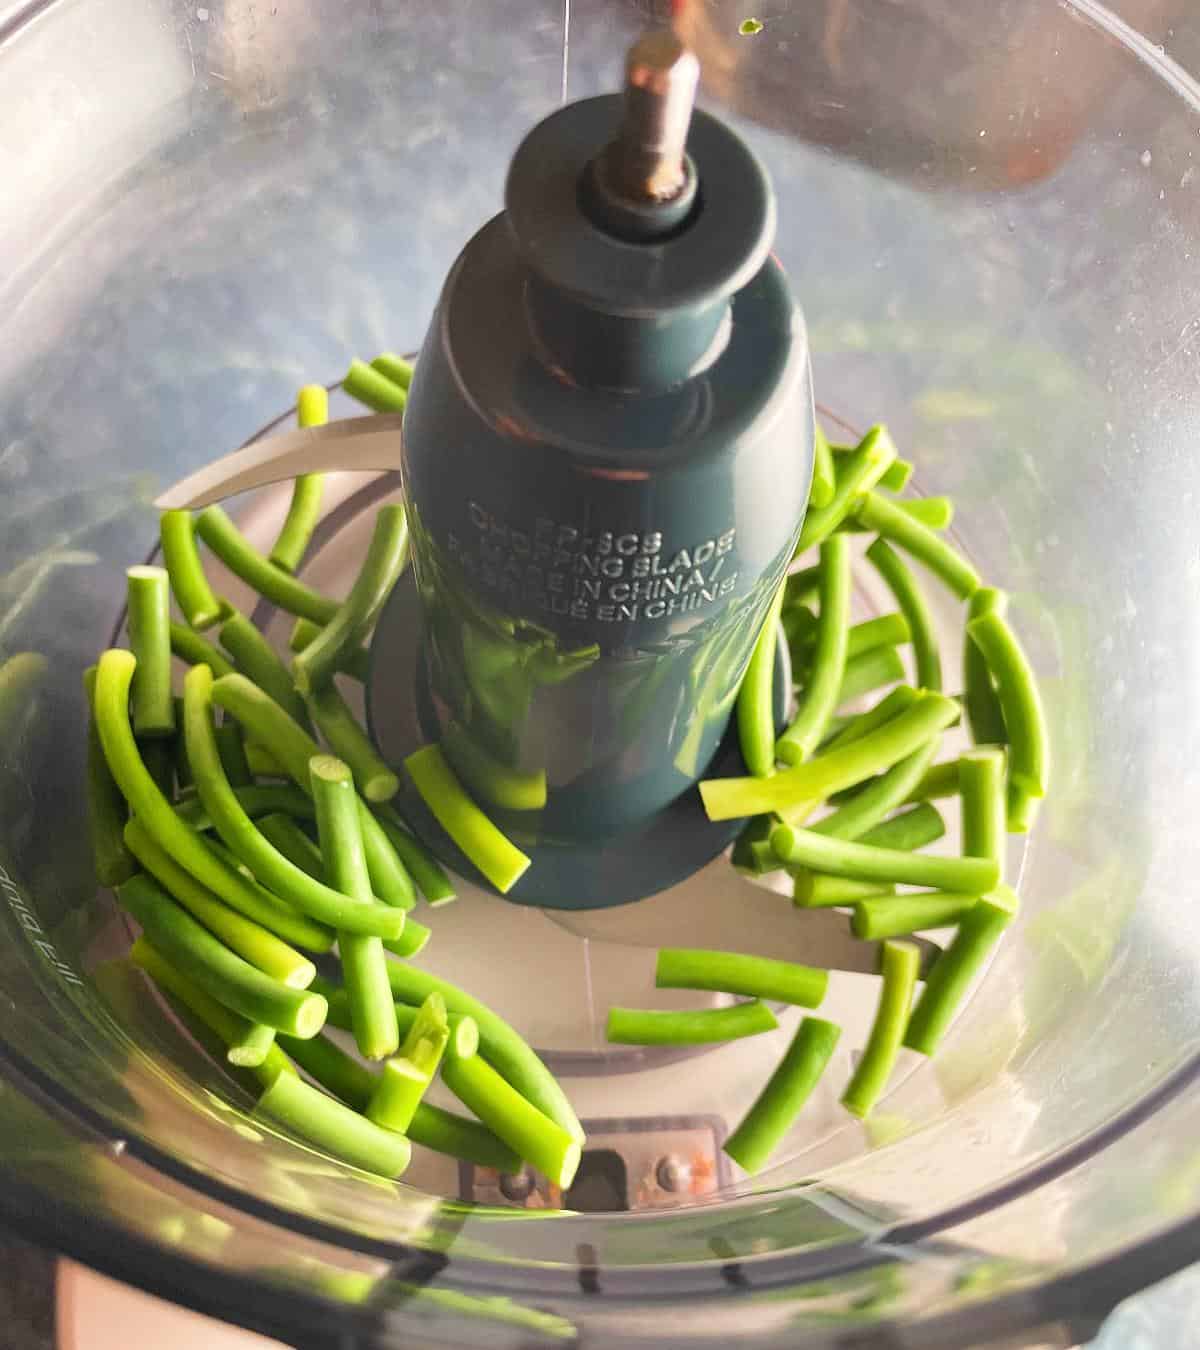 pieces of garlic scapes in a food processor.